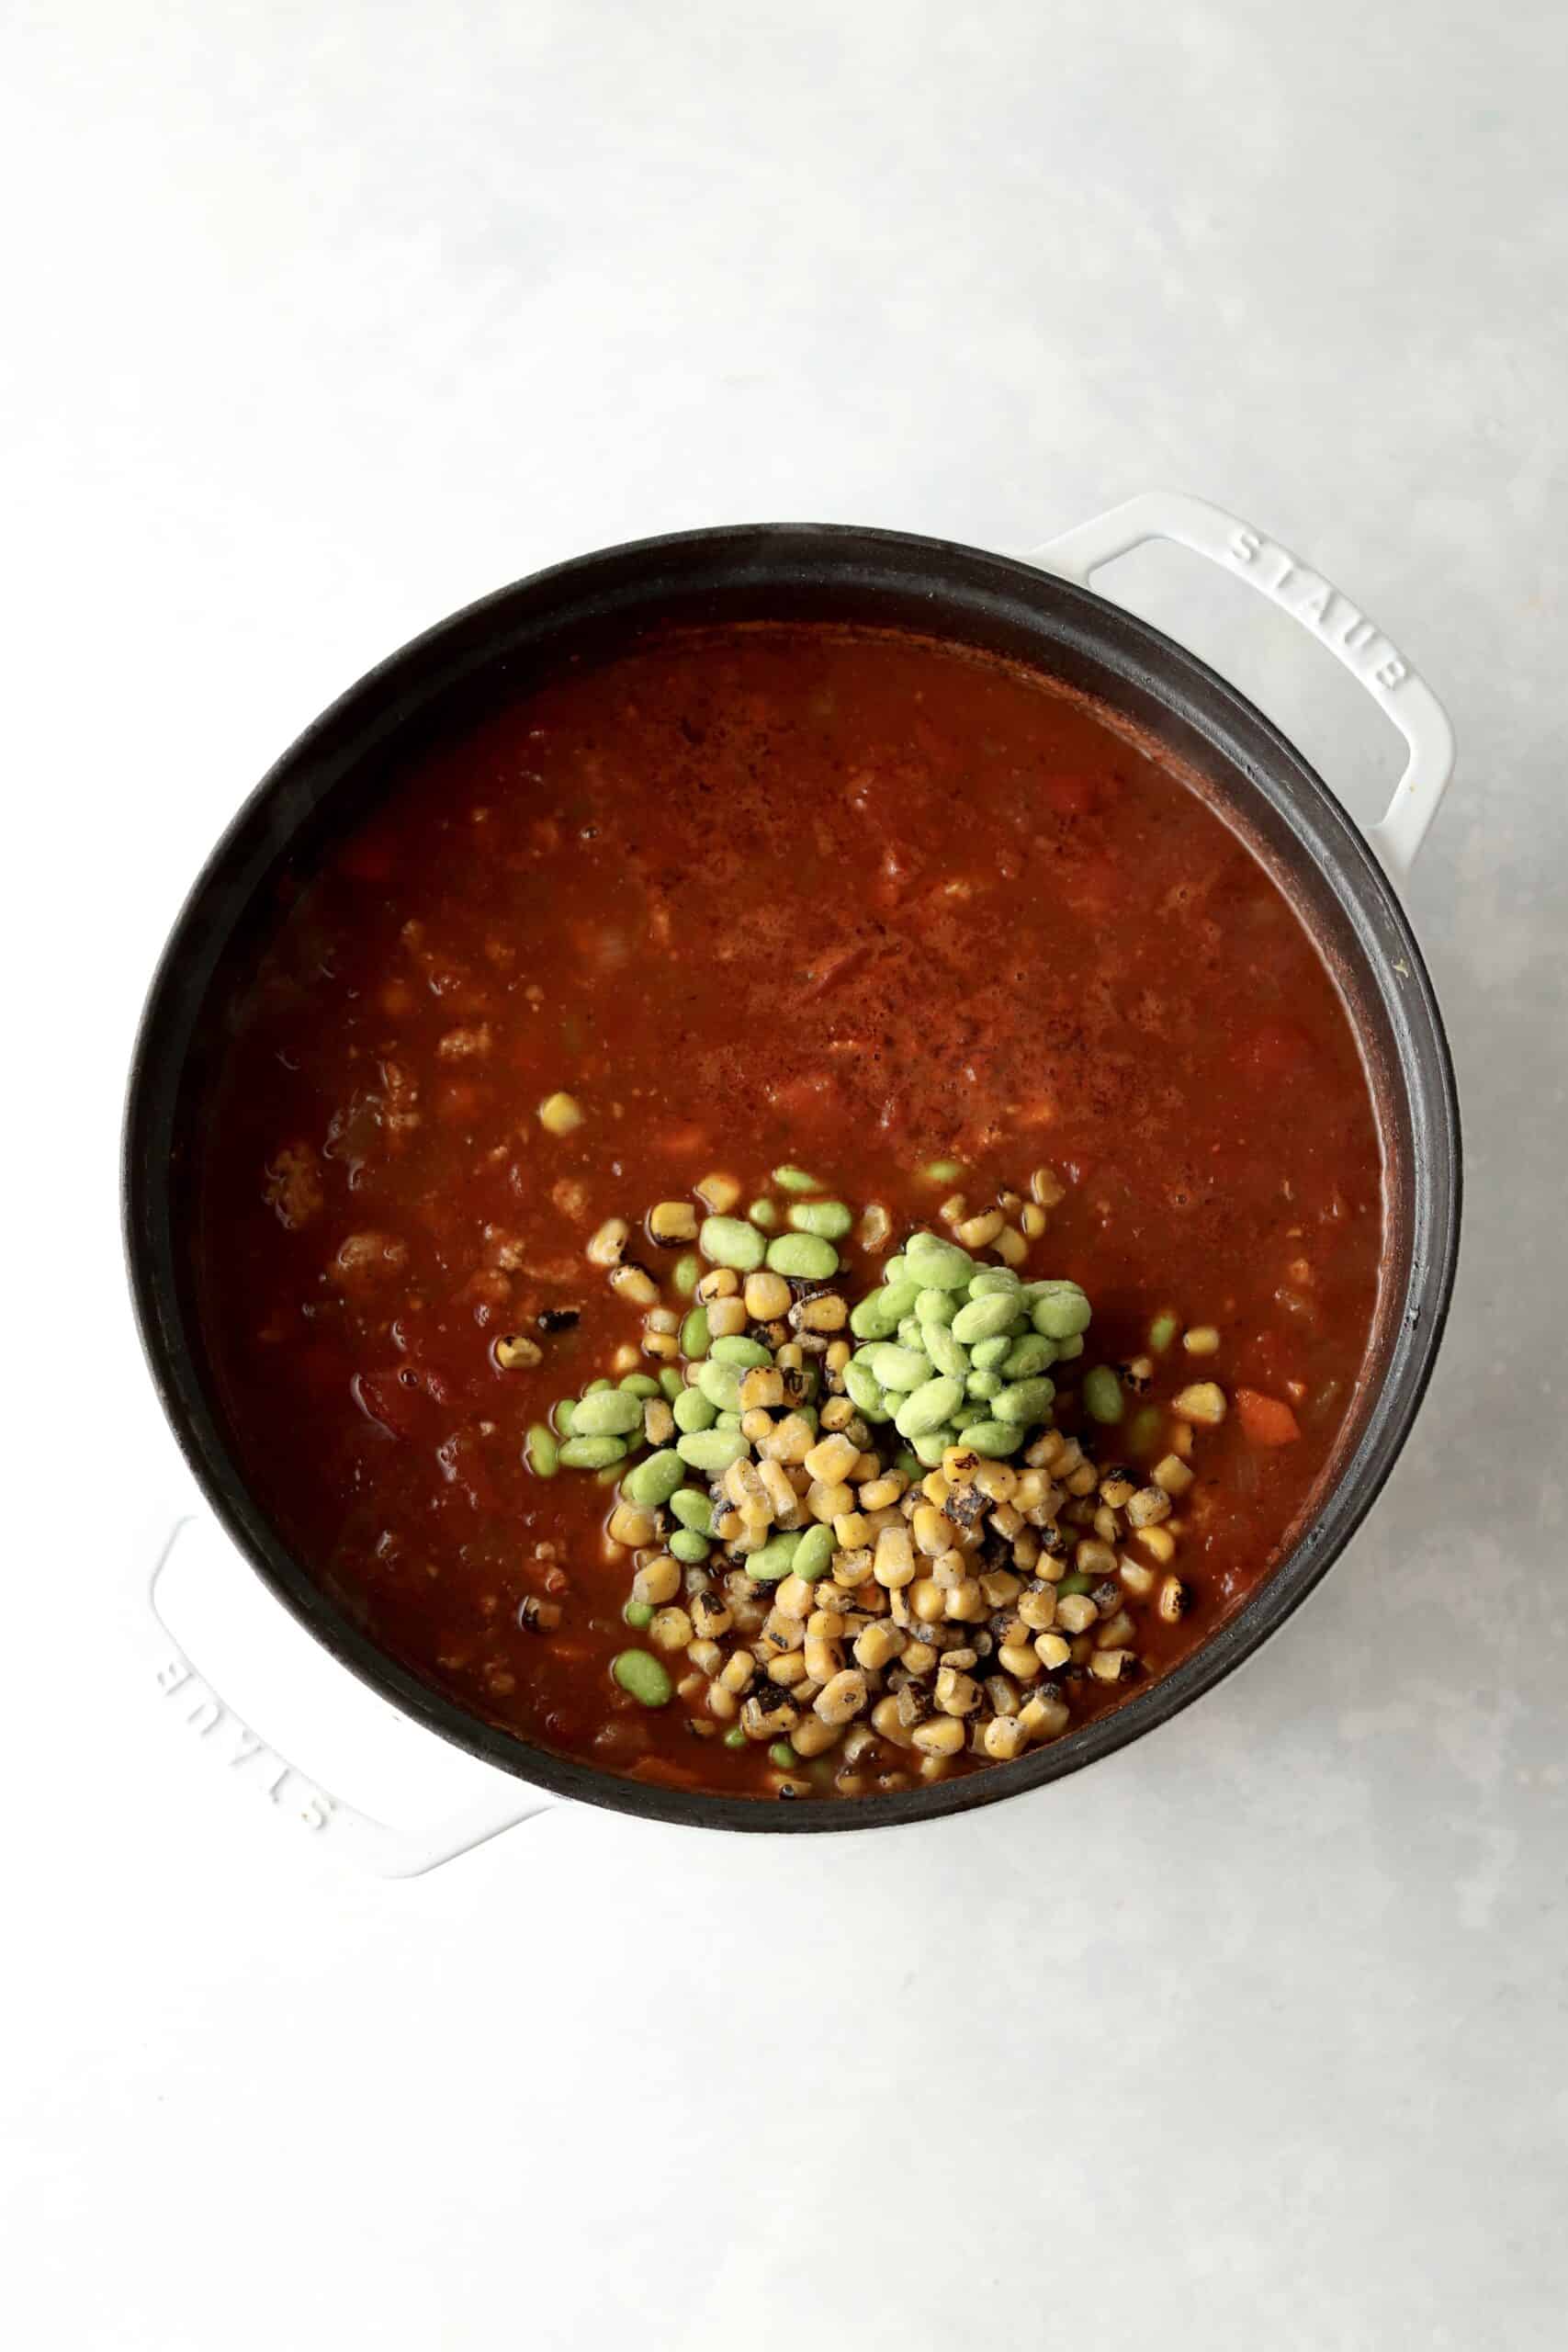 edamame and corn kernels added to chili